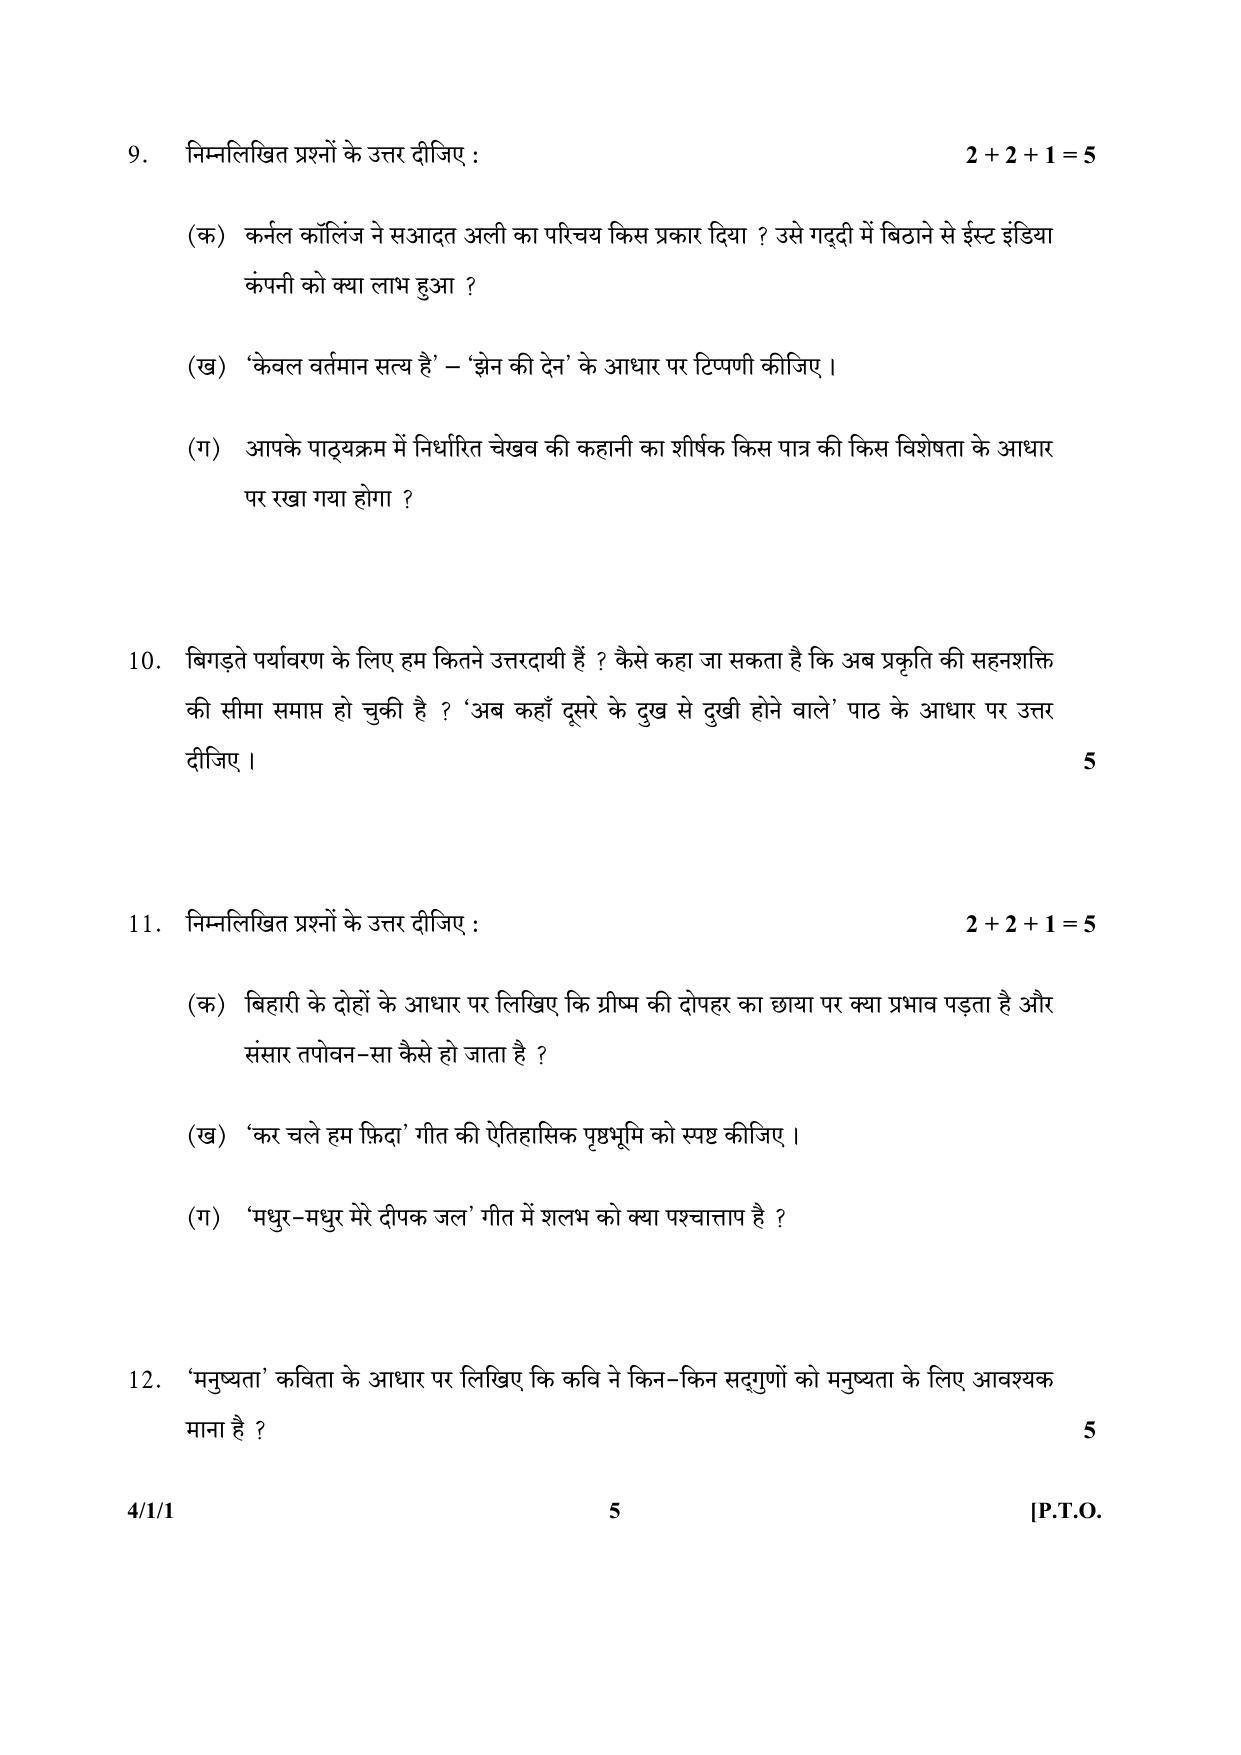 CBSE Class 10 4-1-1_Hindi 2017-comptt Question Paper - Page 5